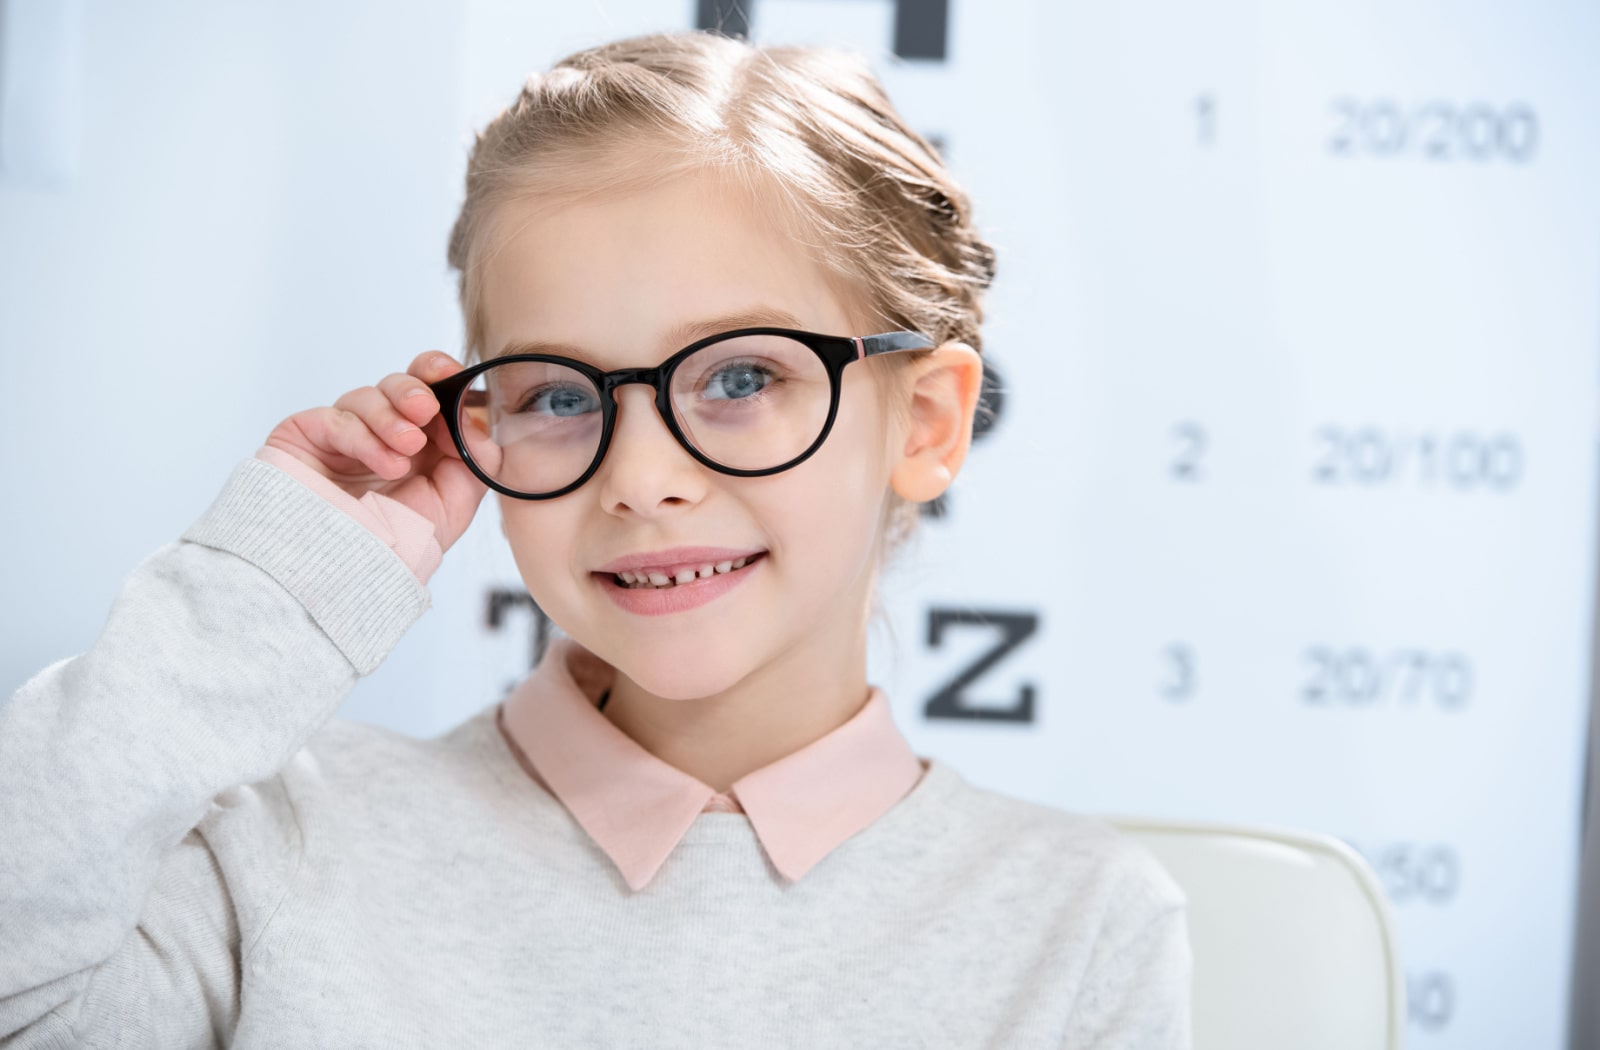 A young girl trying on glasses at the optometrist's office, and she is standing in front of a Snellen eye chart.